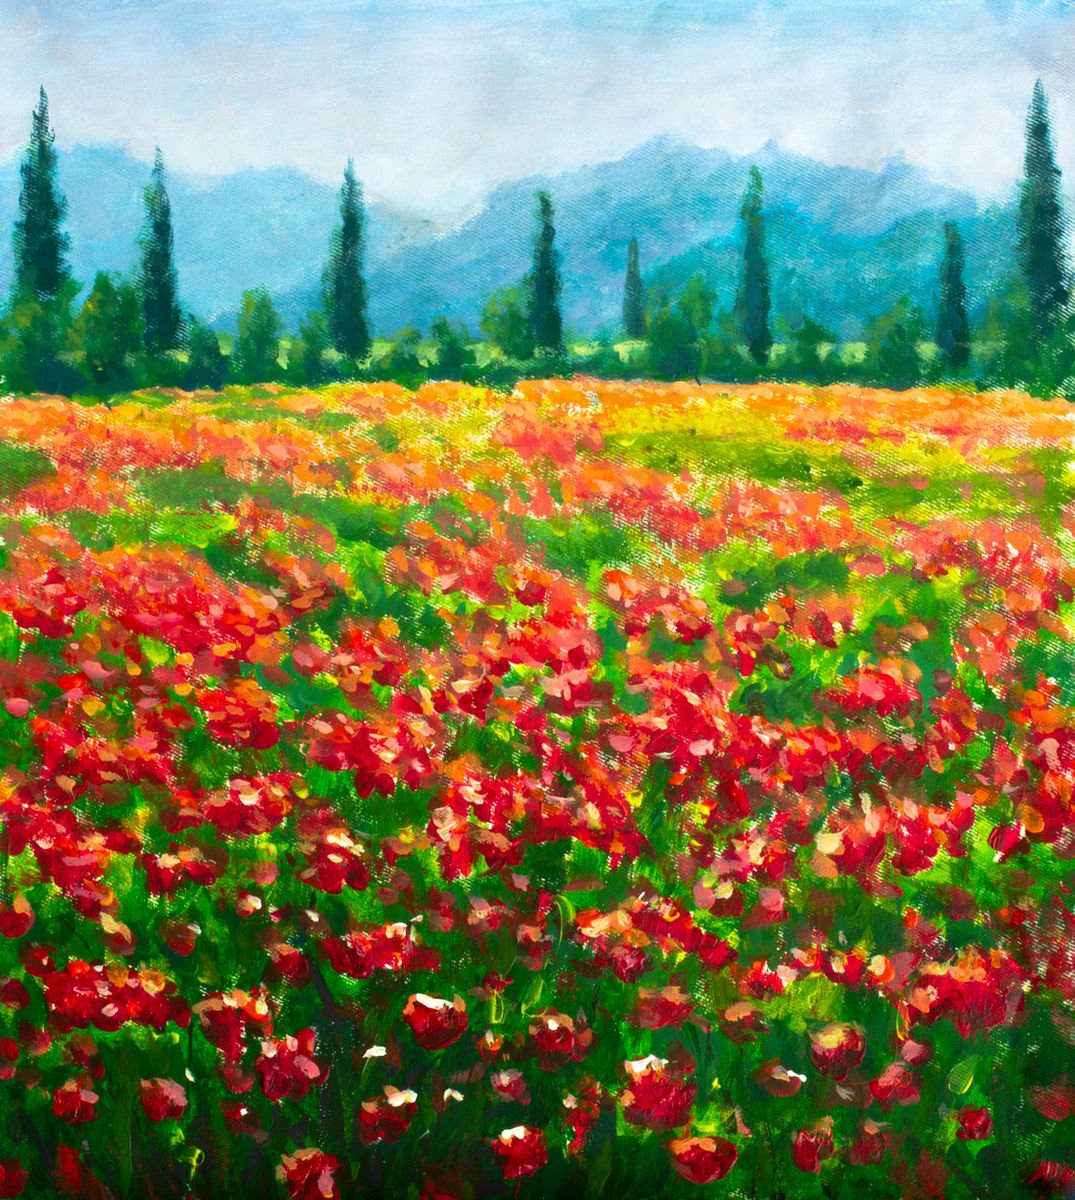 Summer red poppies, roses, tulips flowers in green grass field Italian tuscany tall trees cypresses, blue mountains France landscape nature acrylic original painting on canvas artwork fine art